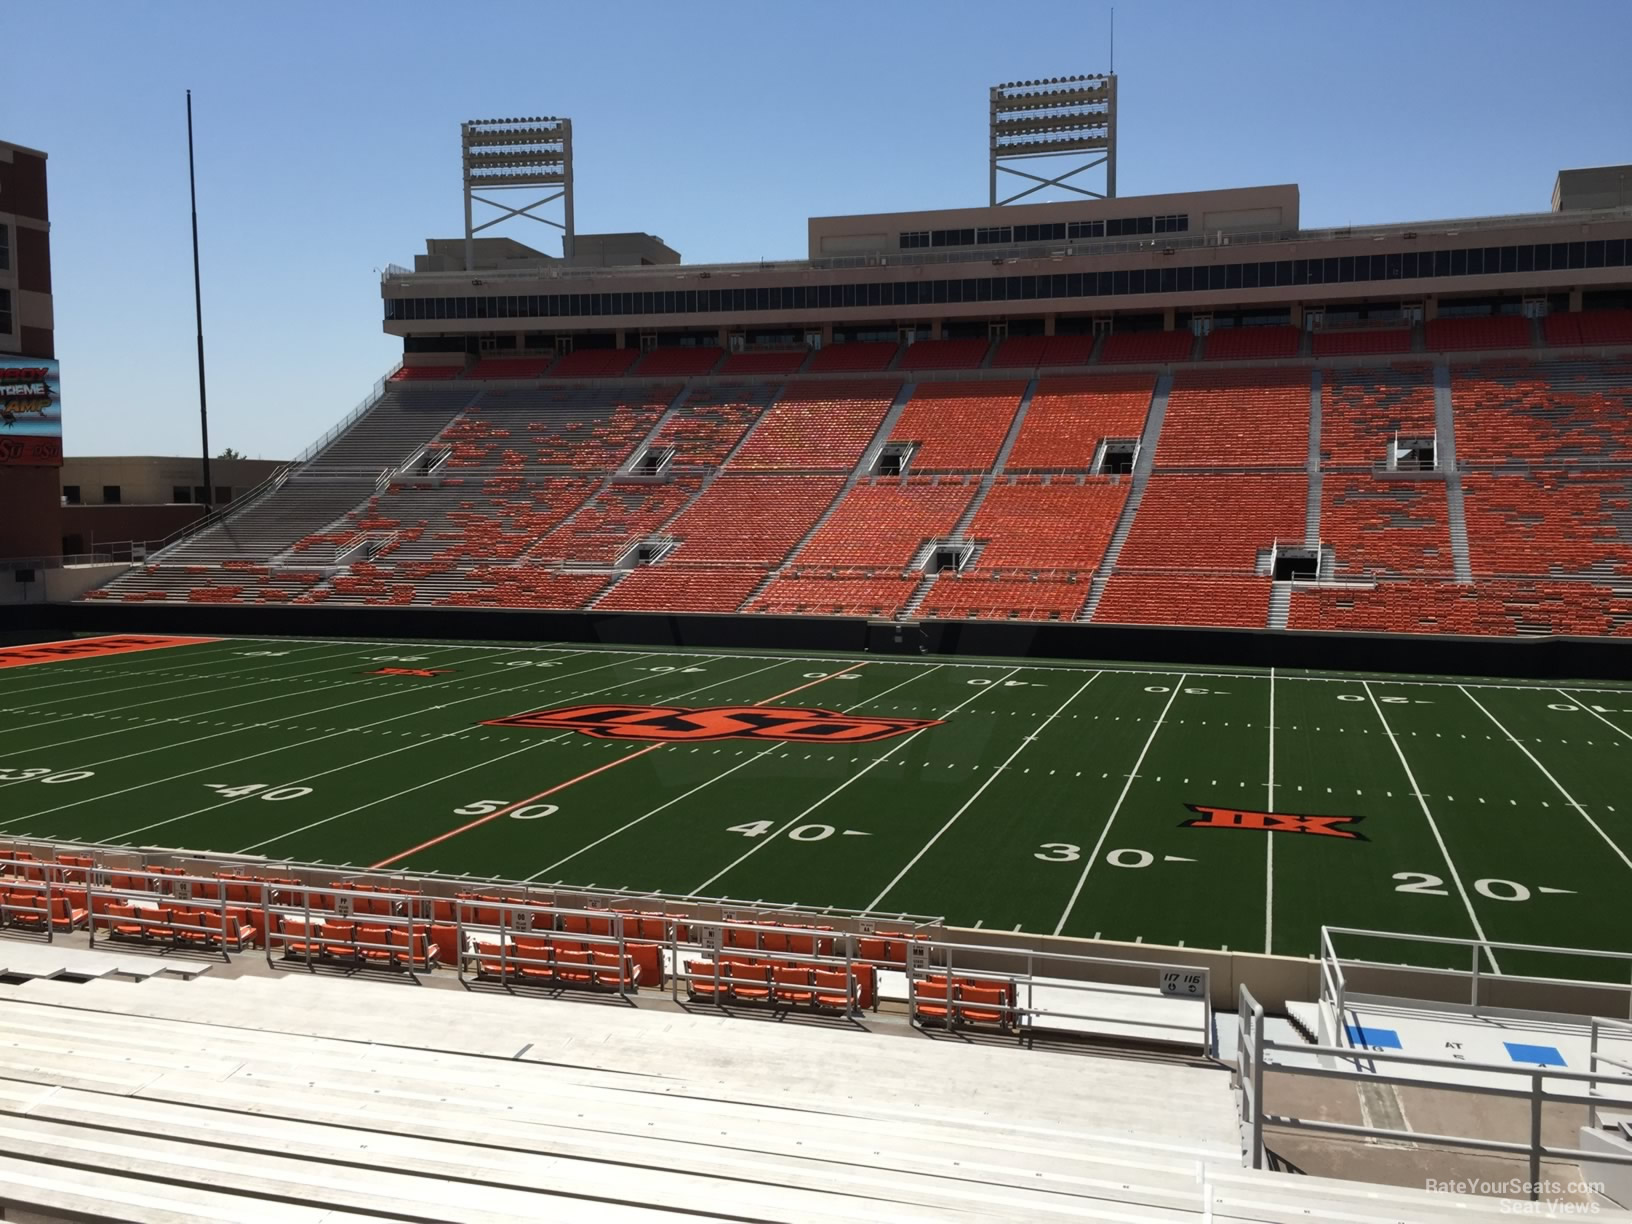 section 224a, row 20 seat view  - boone pickens stadium